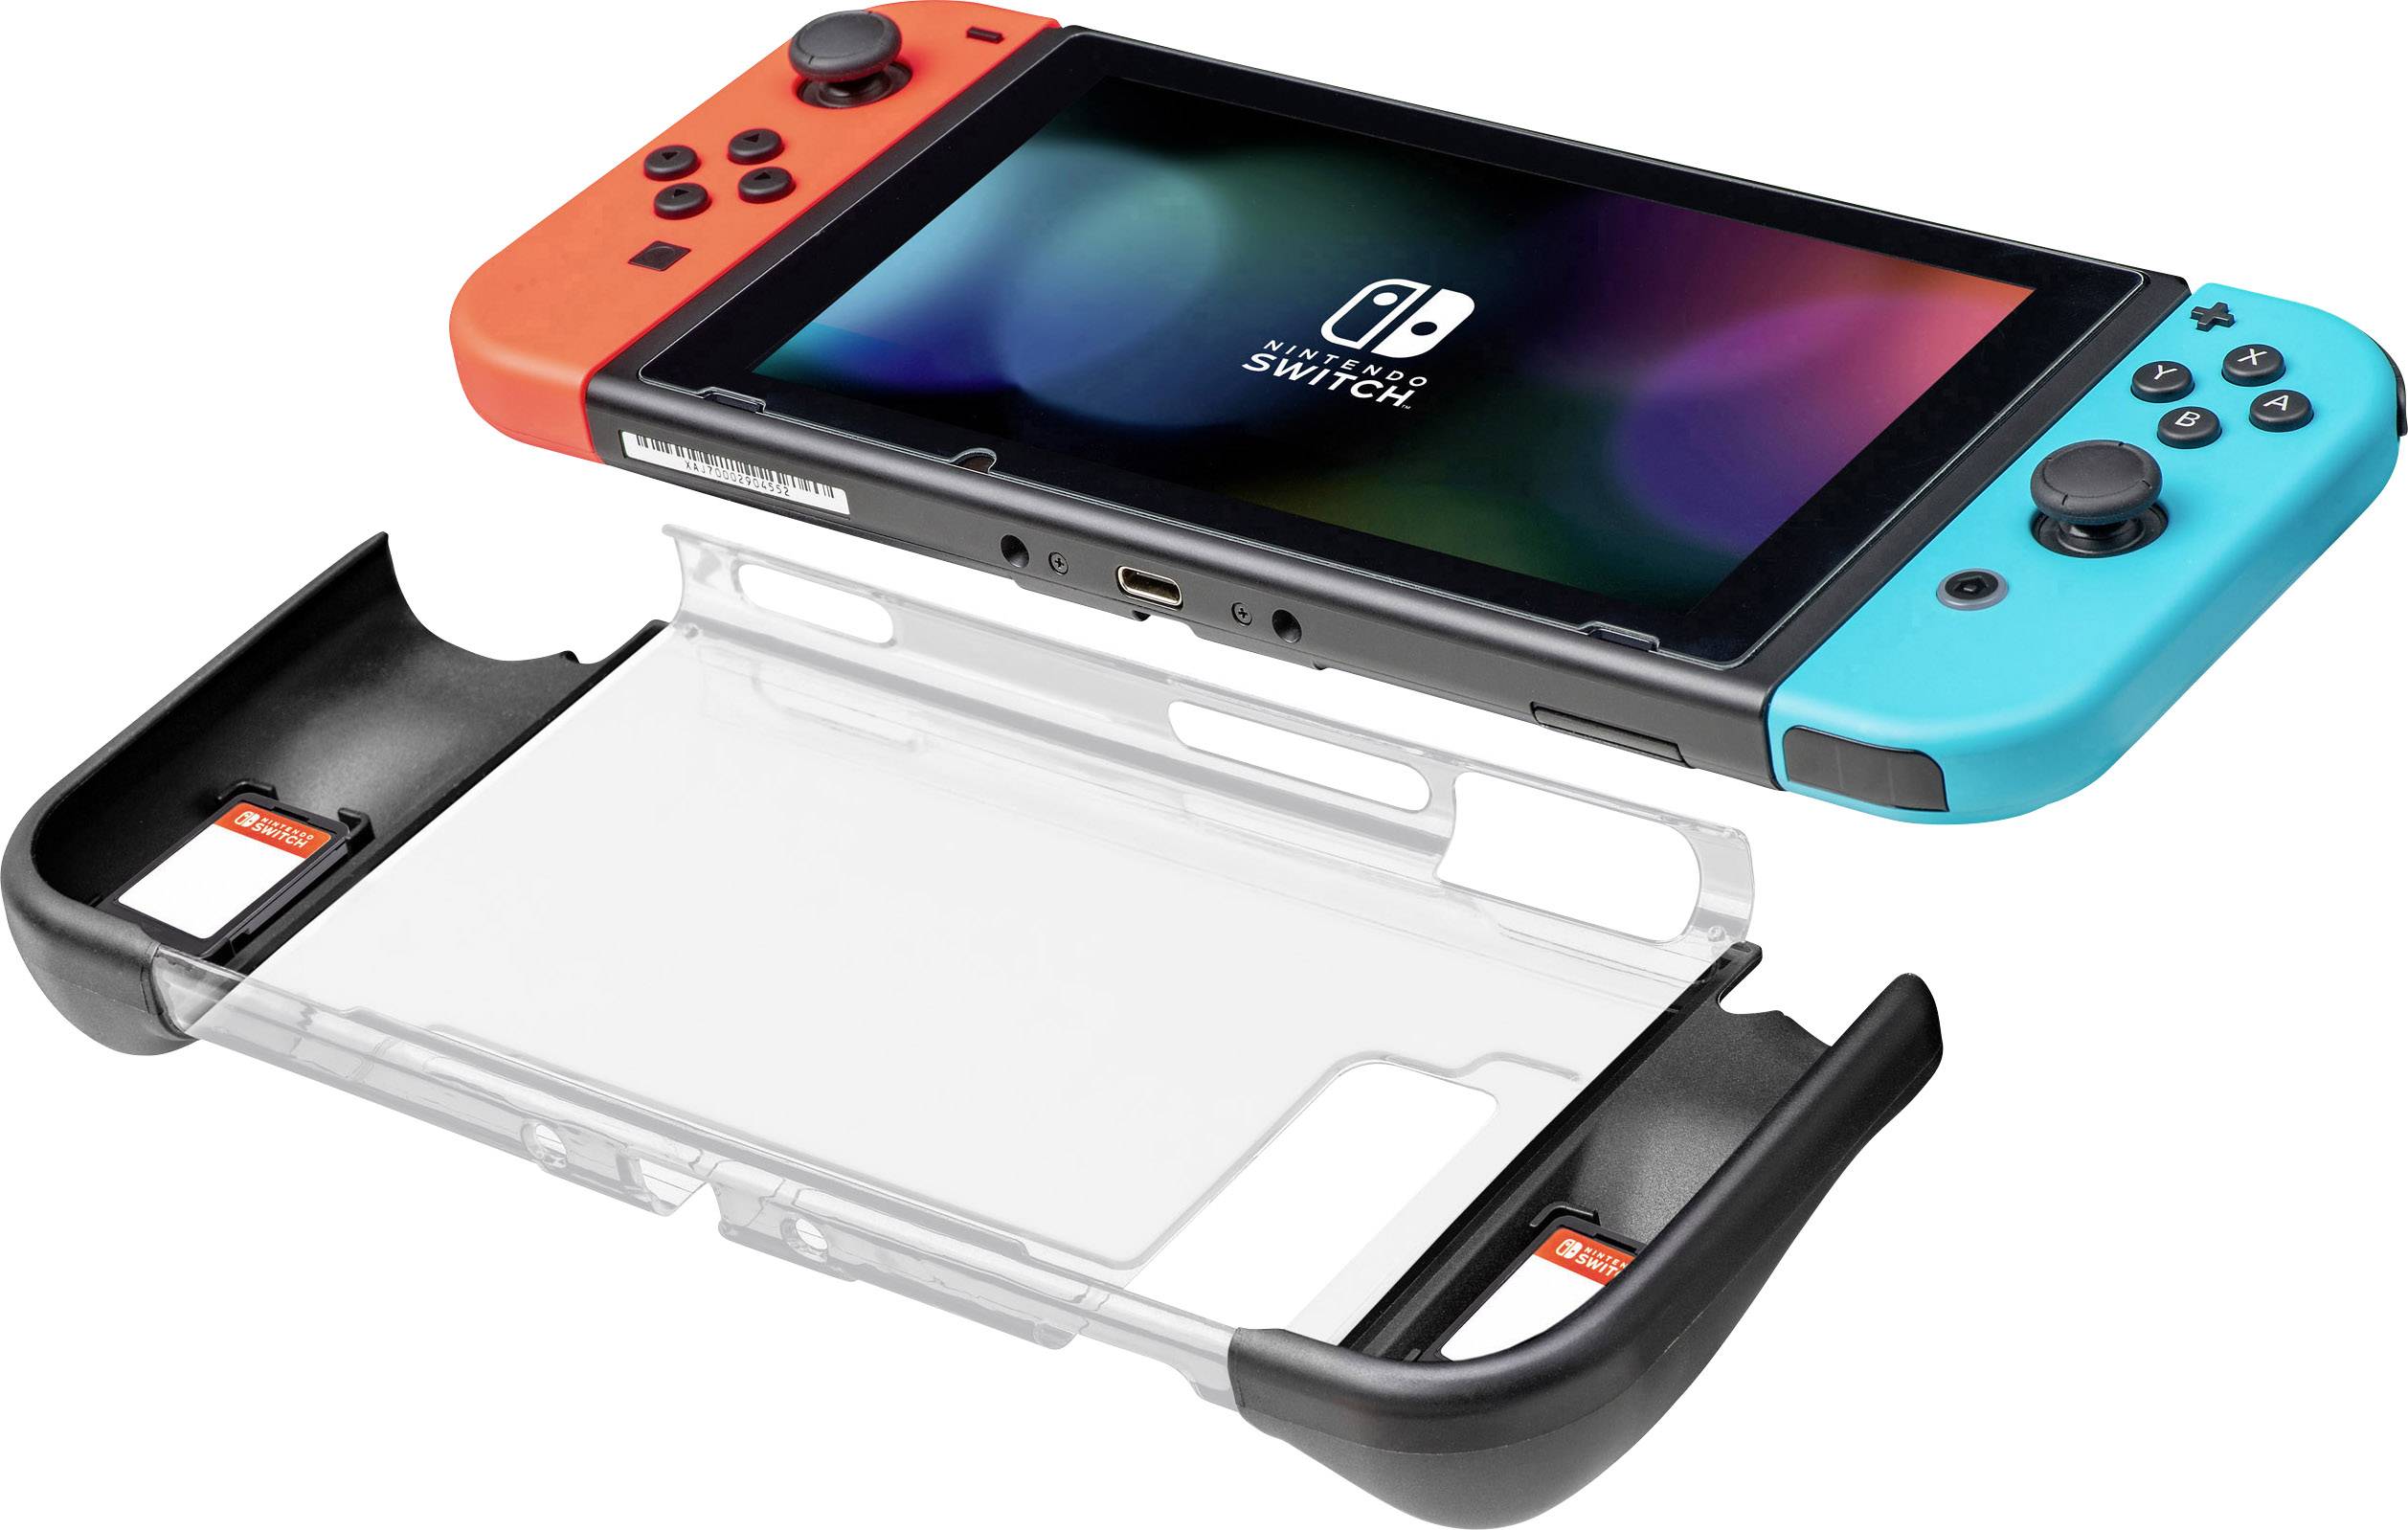 switch game accessories set